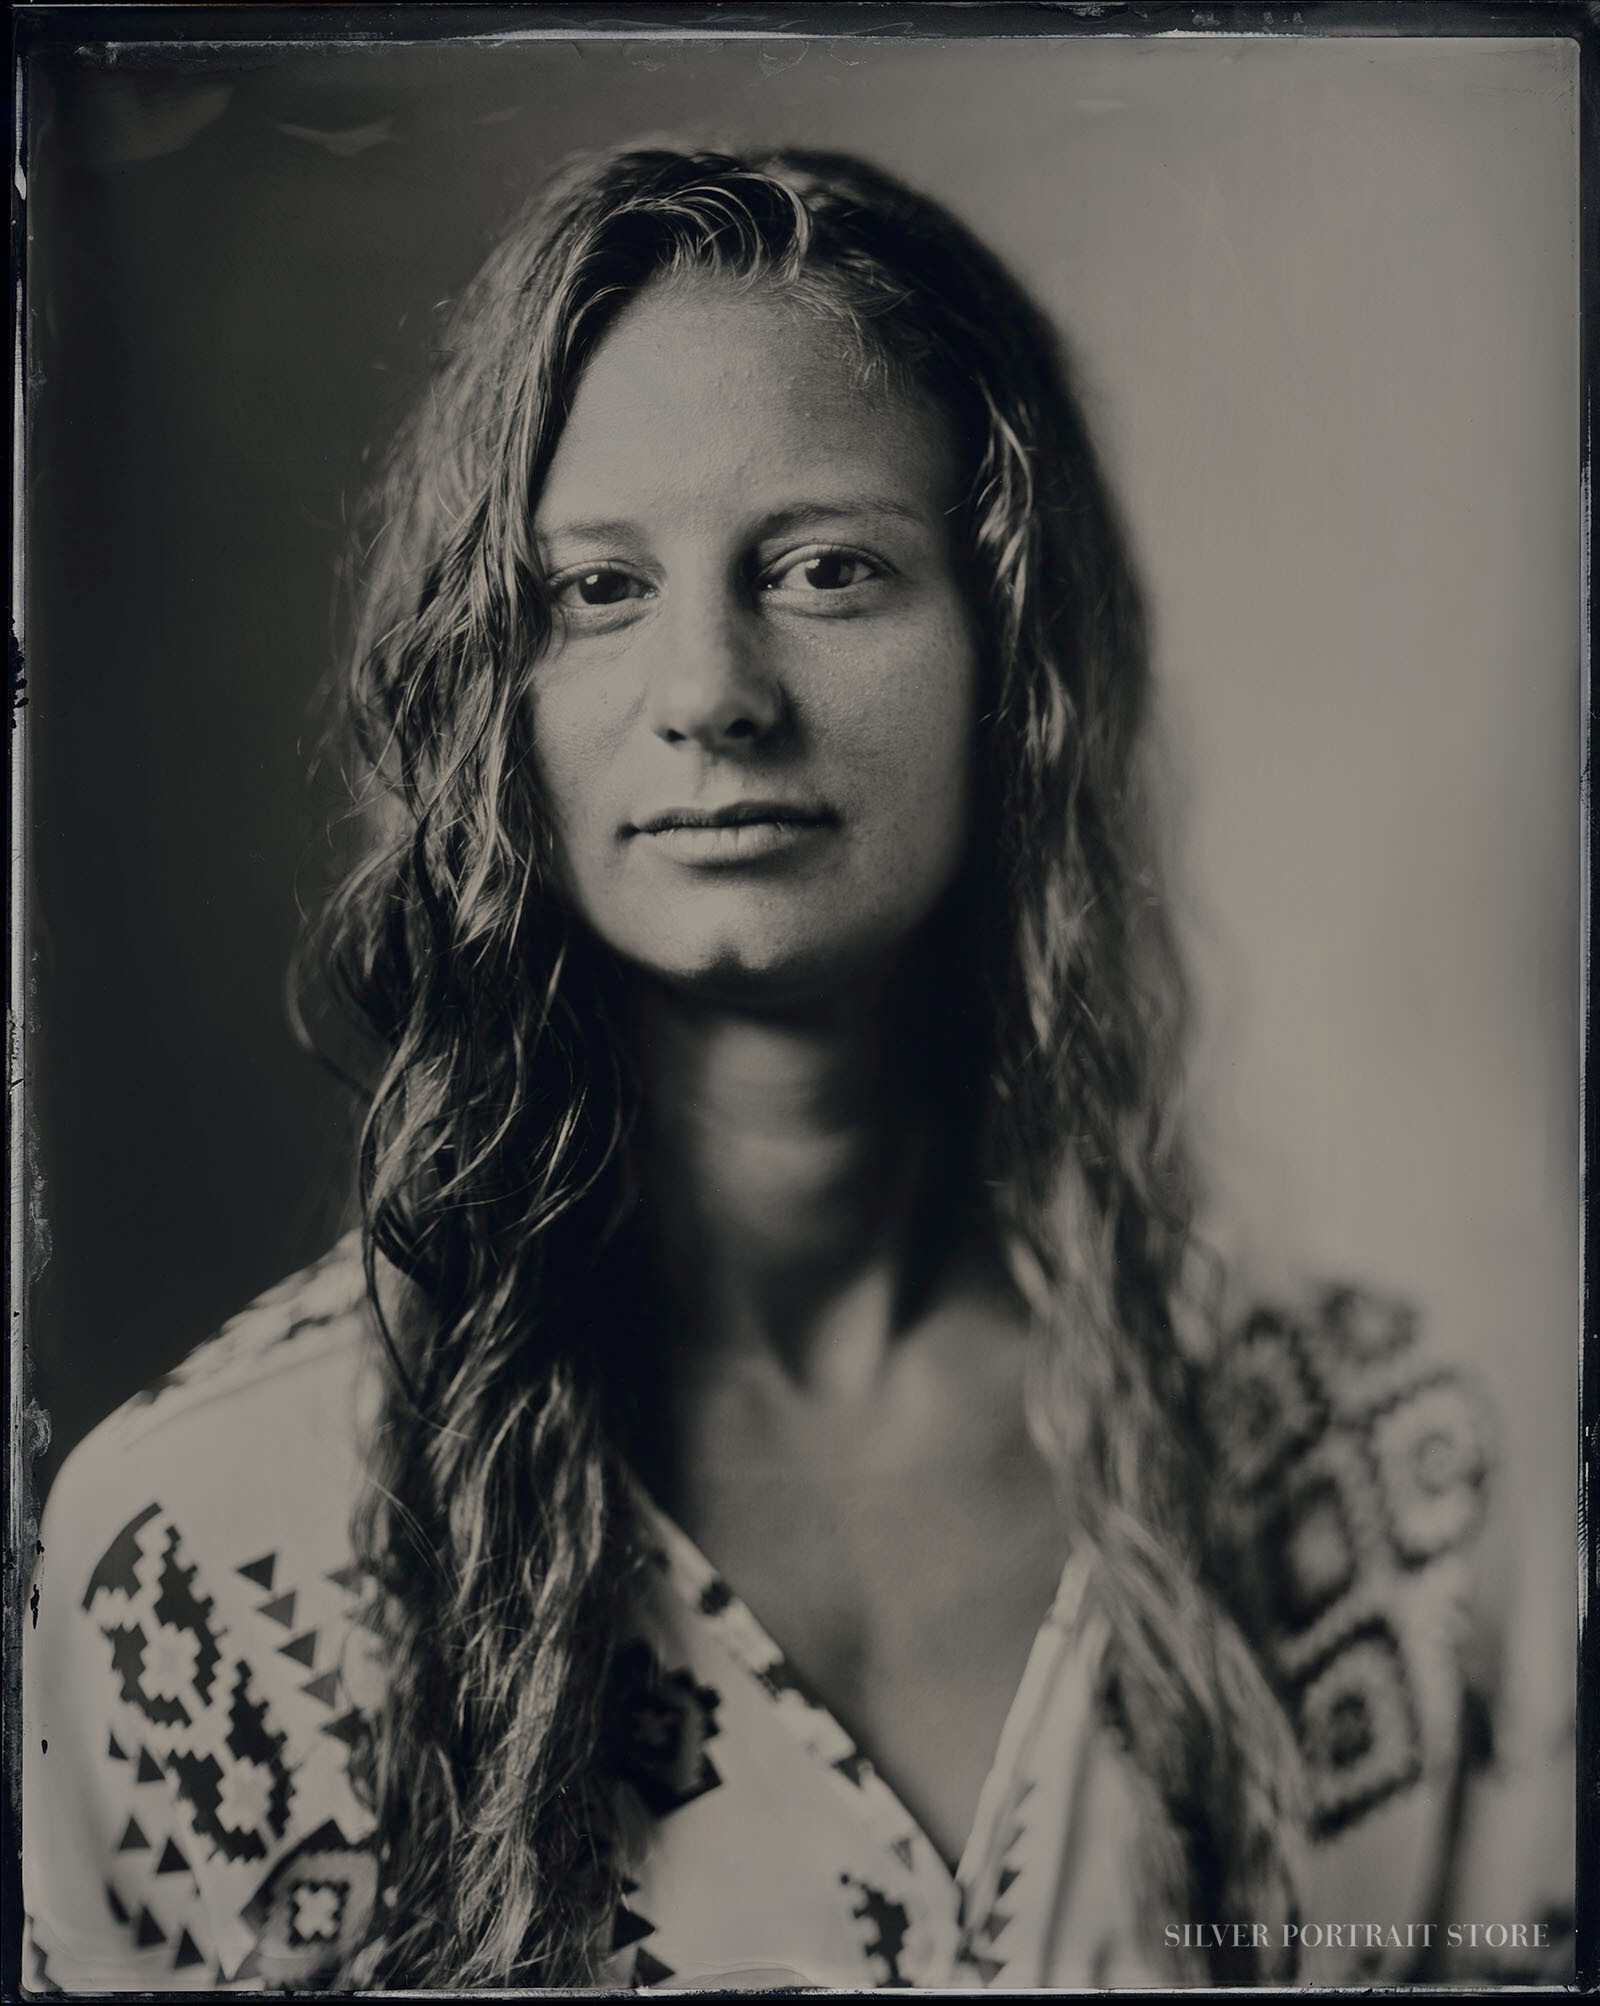 Anin-Silver Portrait Store-scan from Wet plate collodion-Tintype 20 x 25 cm